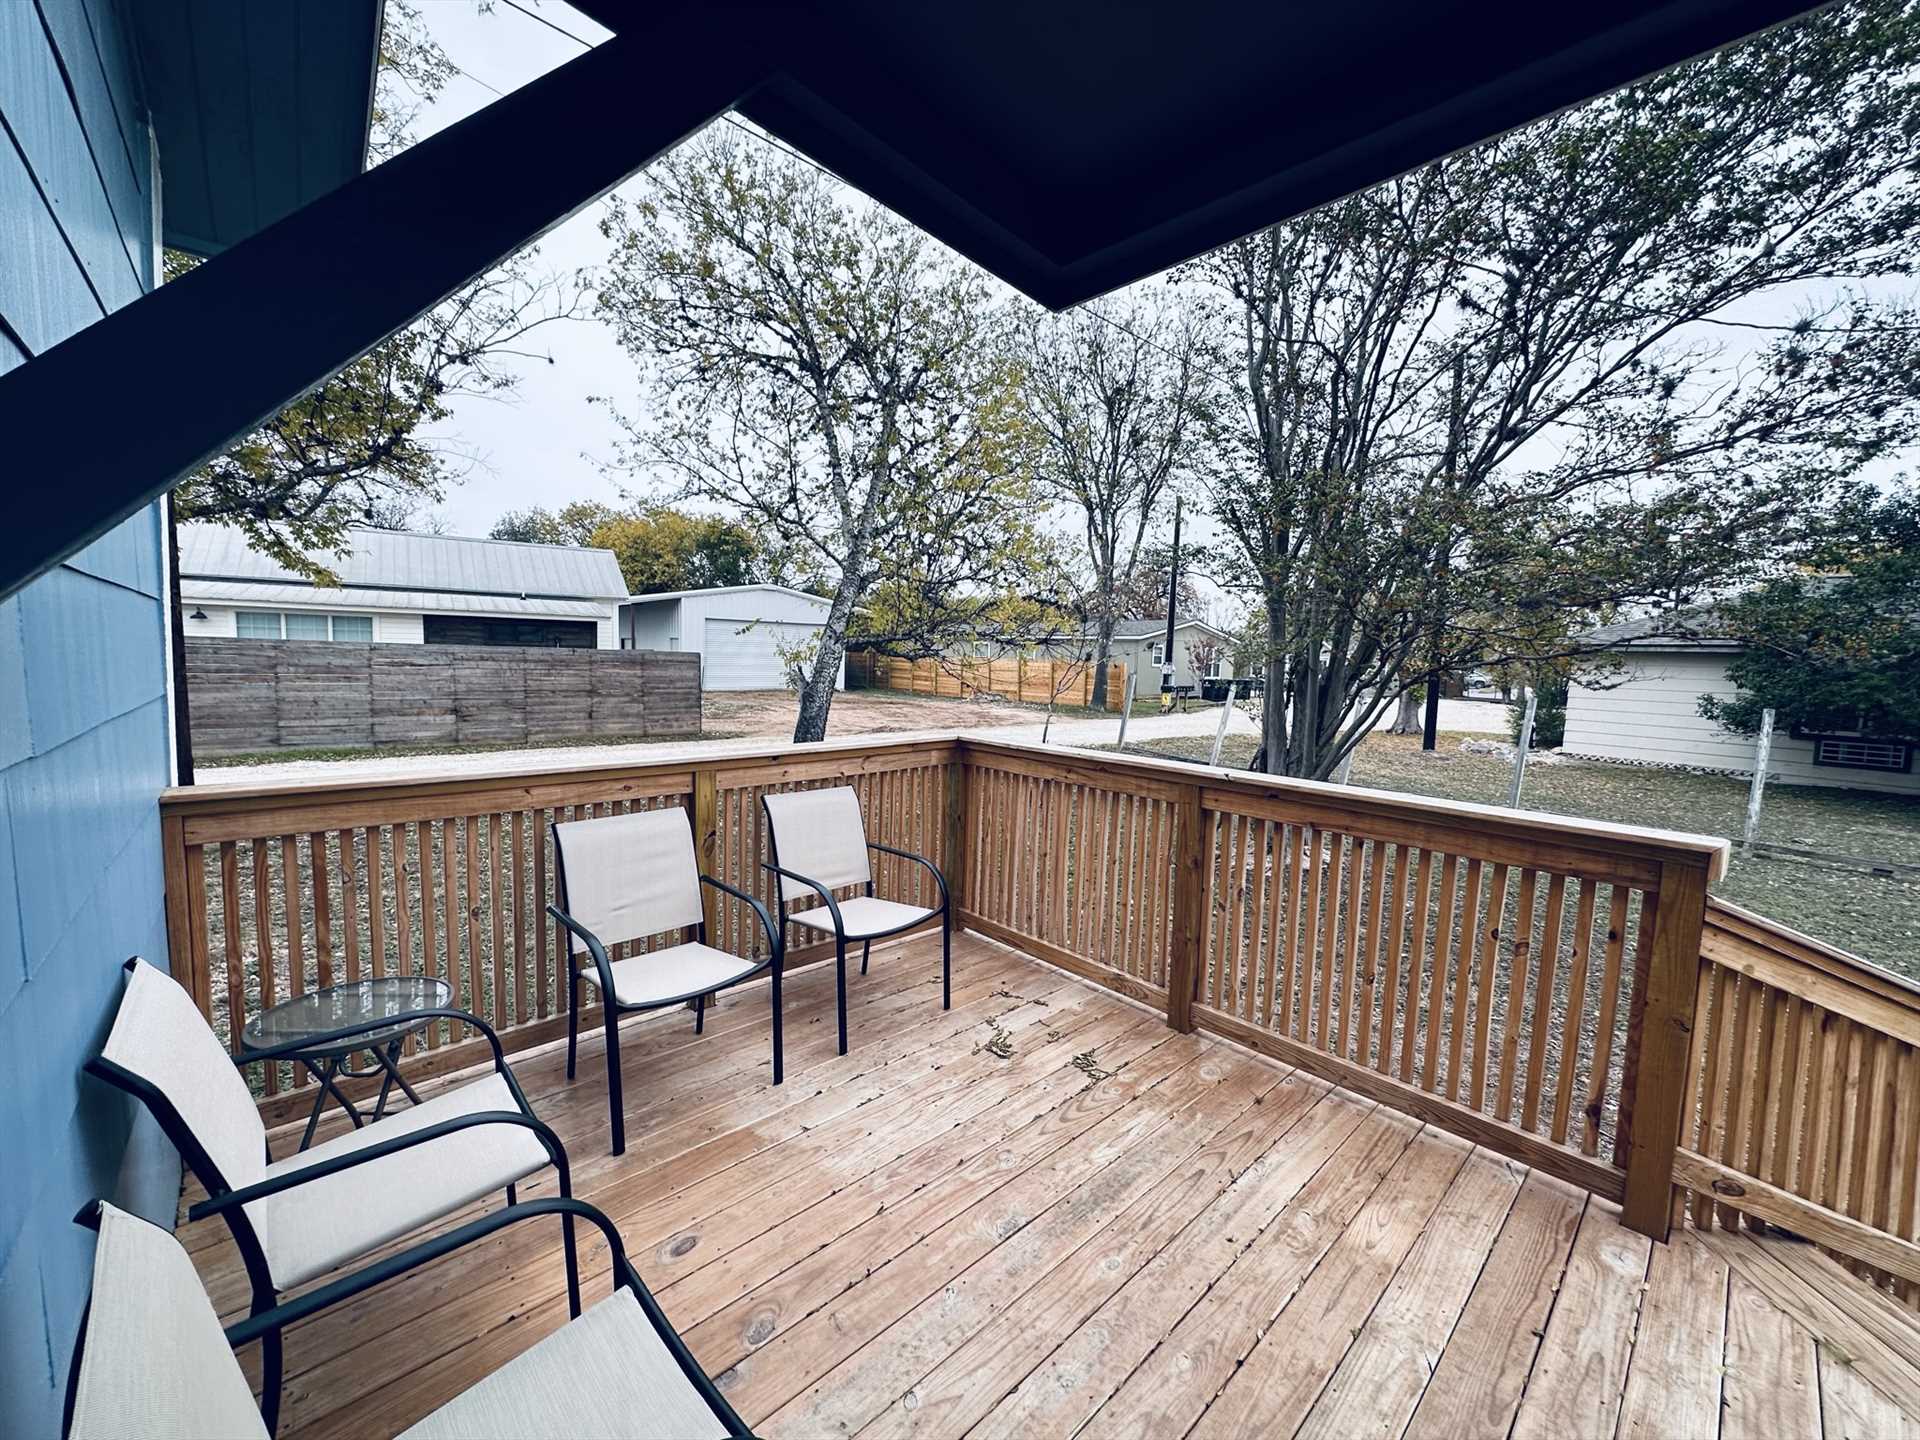                                                 The back deck is furnished with plenty of outdoor furniture. It's a great place to mingle, enjoy the fresh air, and relax!